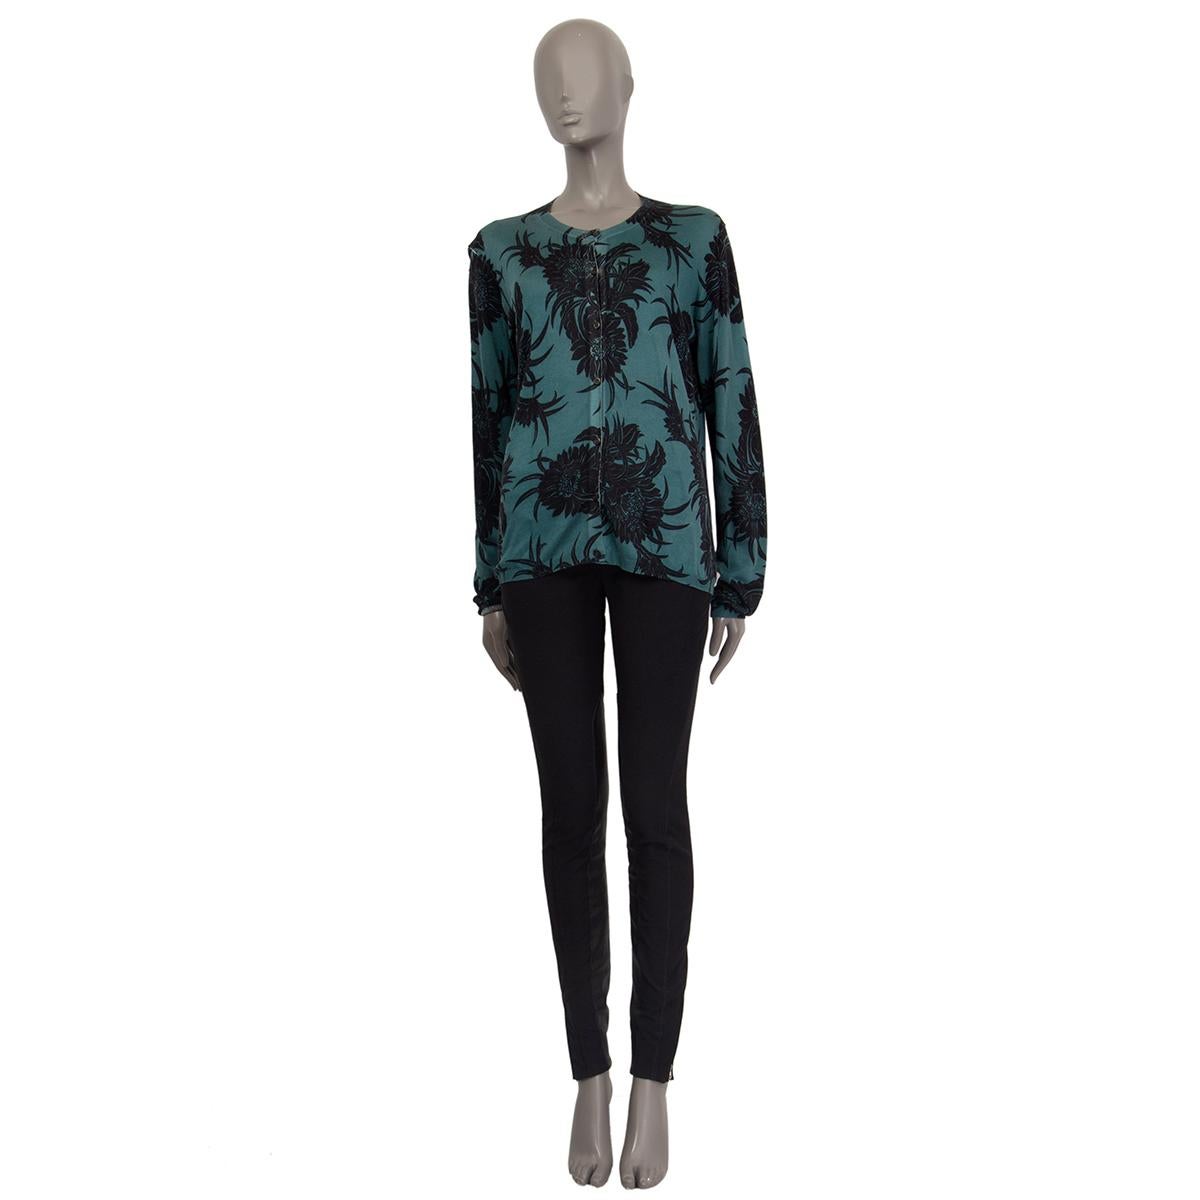 100% authentic Prada button-front crewneck caridigan in teal silk (content tag is missing) with black floral print. Has been worn and is in excellent condition.

Measurements
Tag Size	44
Size	L
Shoulder Width	41cm (16in)
Bust	110cm (42.9in) to 120cm